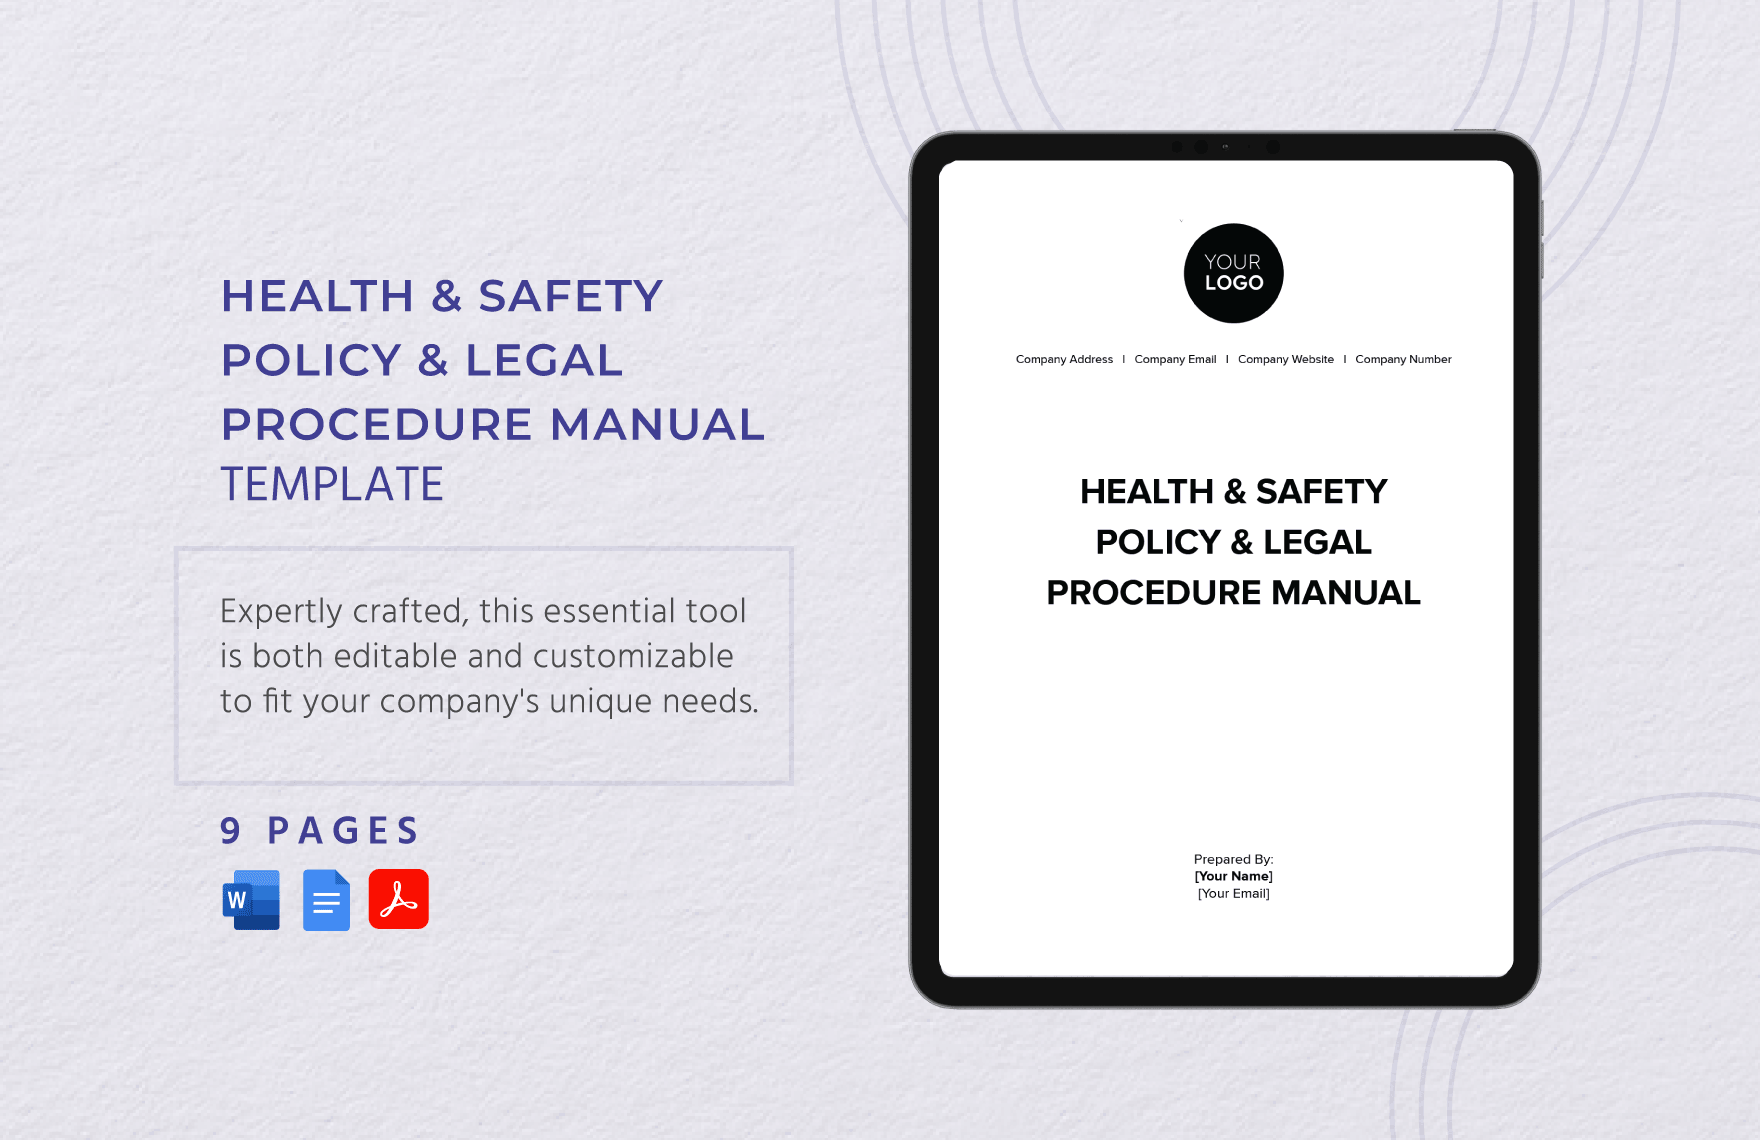 Health & Safety Policy & Legal Procedure Manual Template